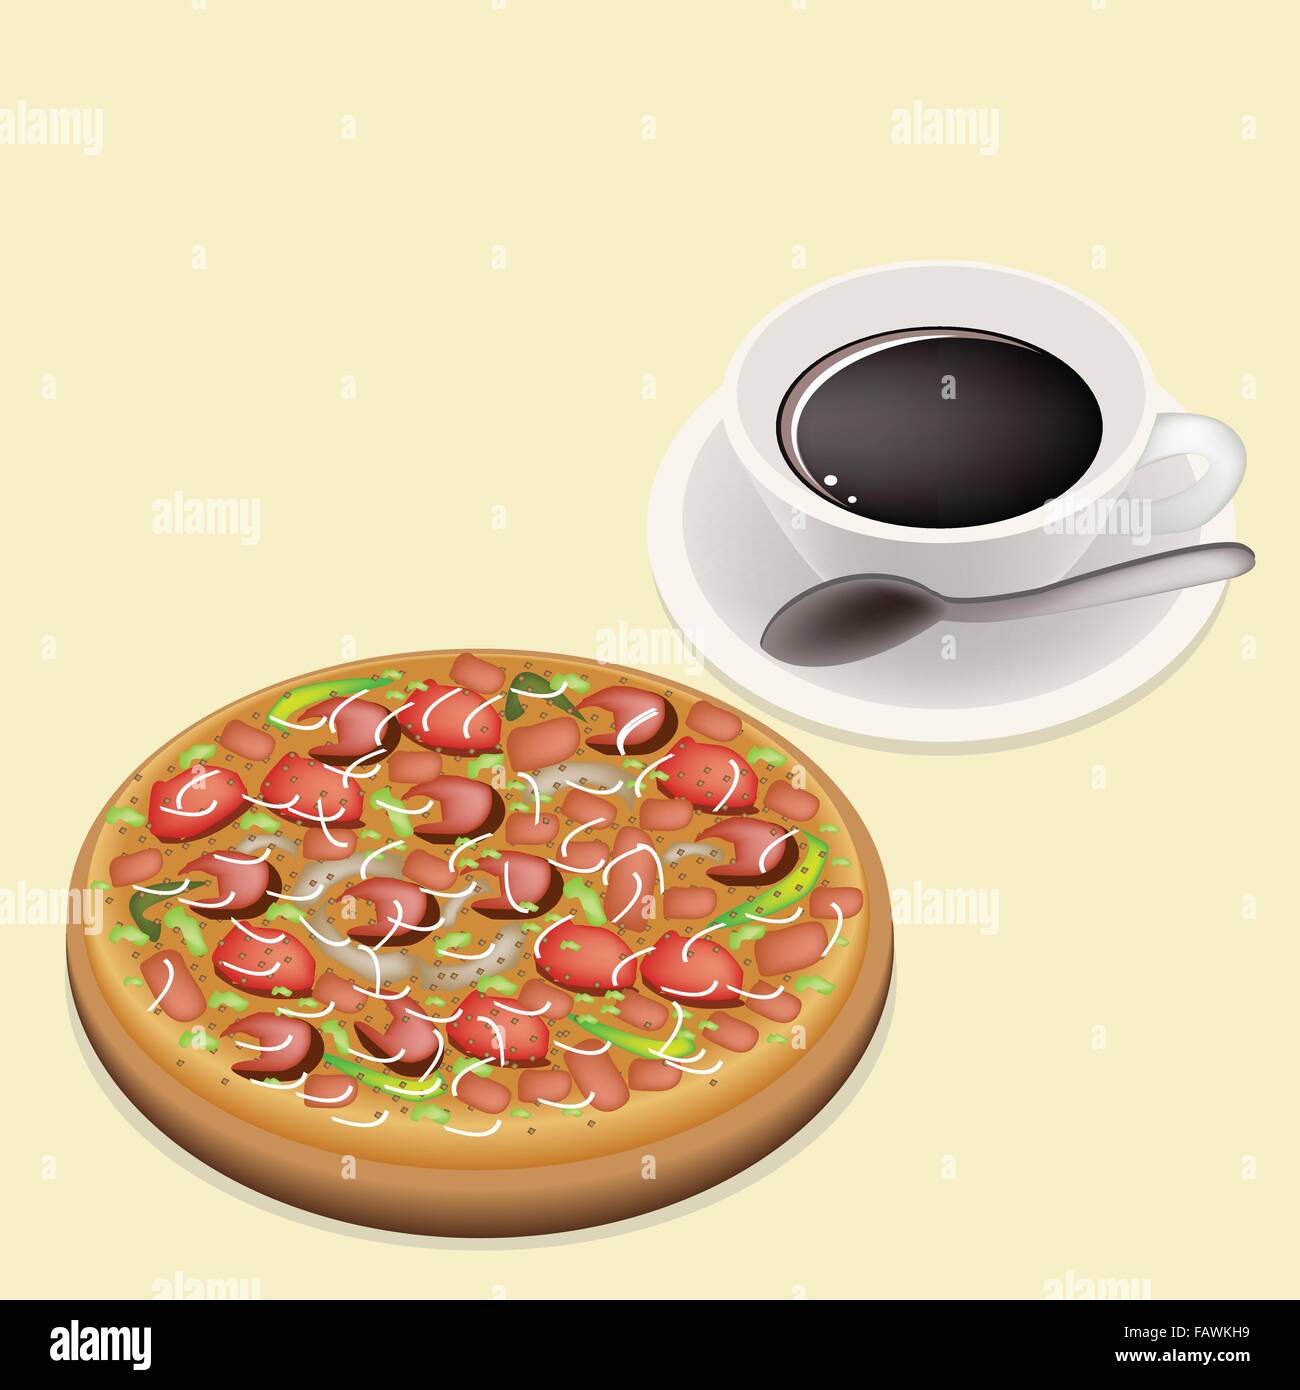 An Illustration of Delicious Pepperoni Pizza with Fresh Tomato, Pesto Sauce, Olives, Basil Leaves and Gobs of Mozzarella Cheese, Stock Vector